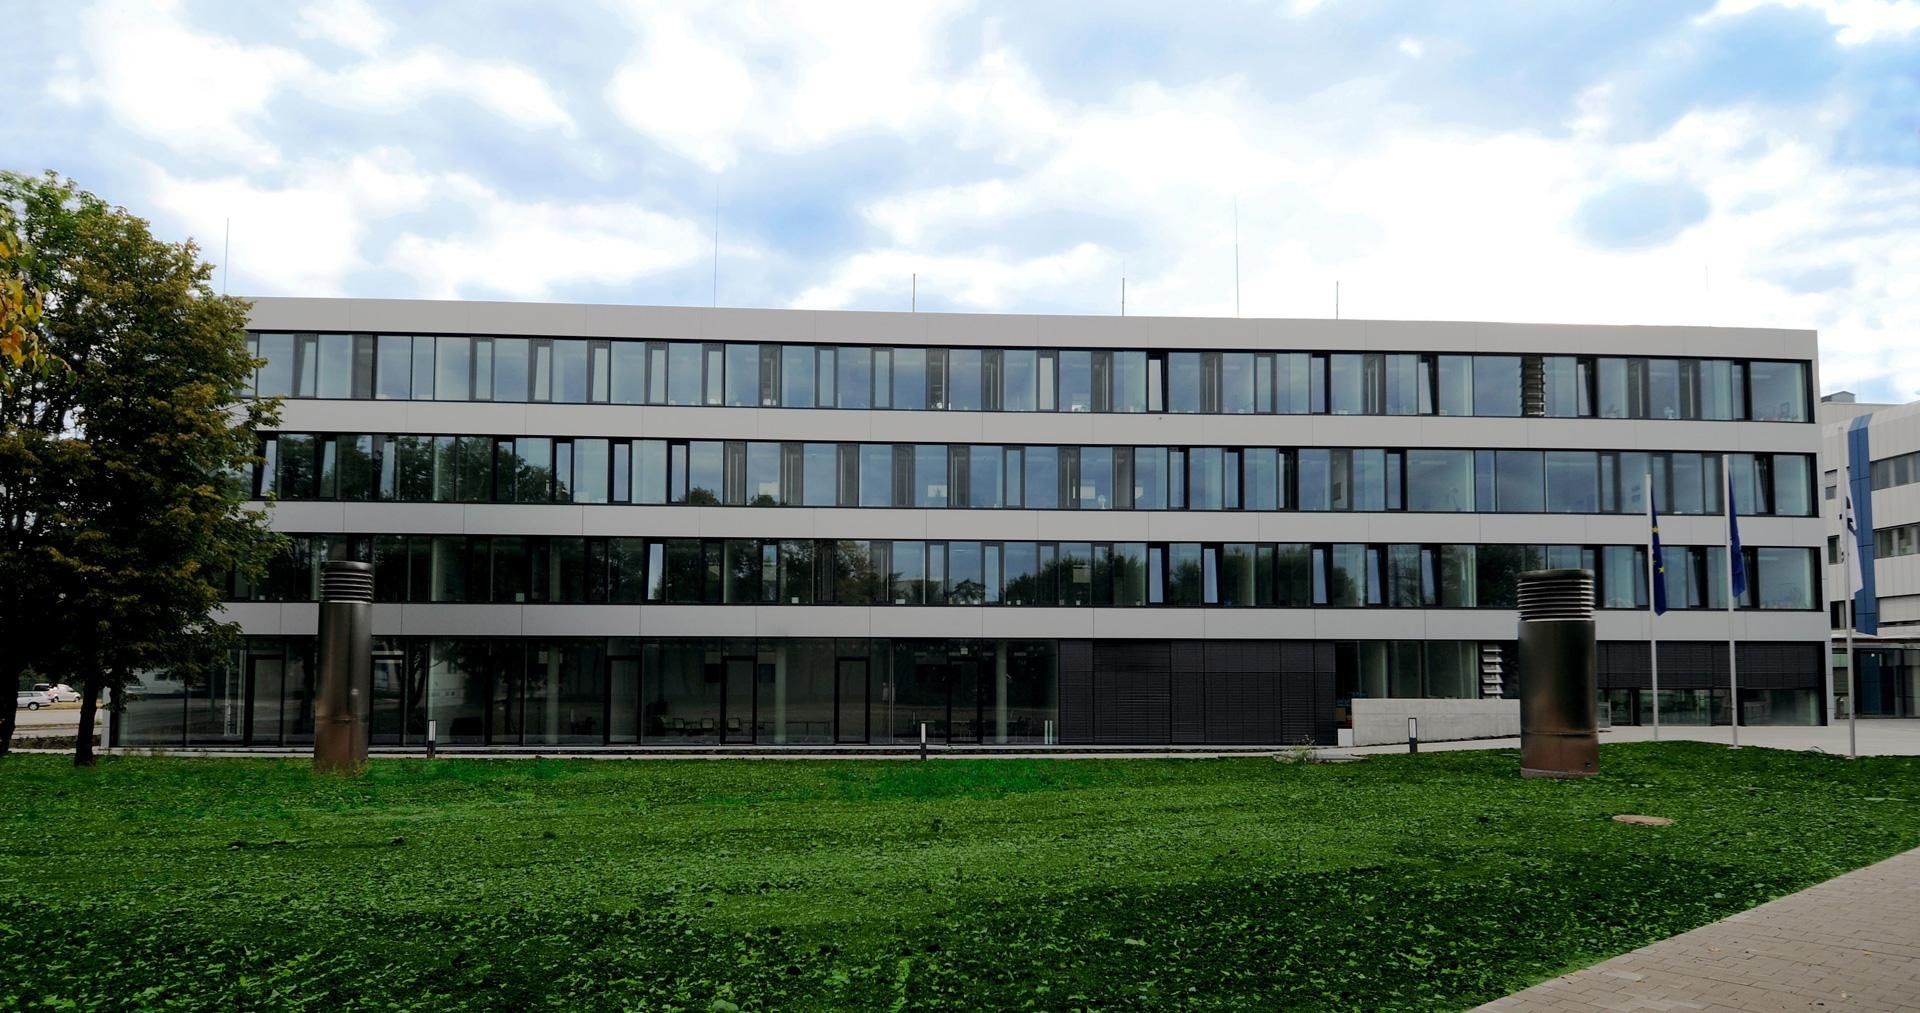 The building of the Remote Sensing Technology Institute in Oberpfaffenhofen